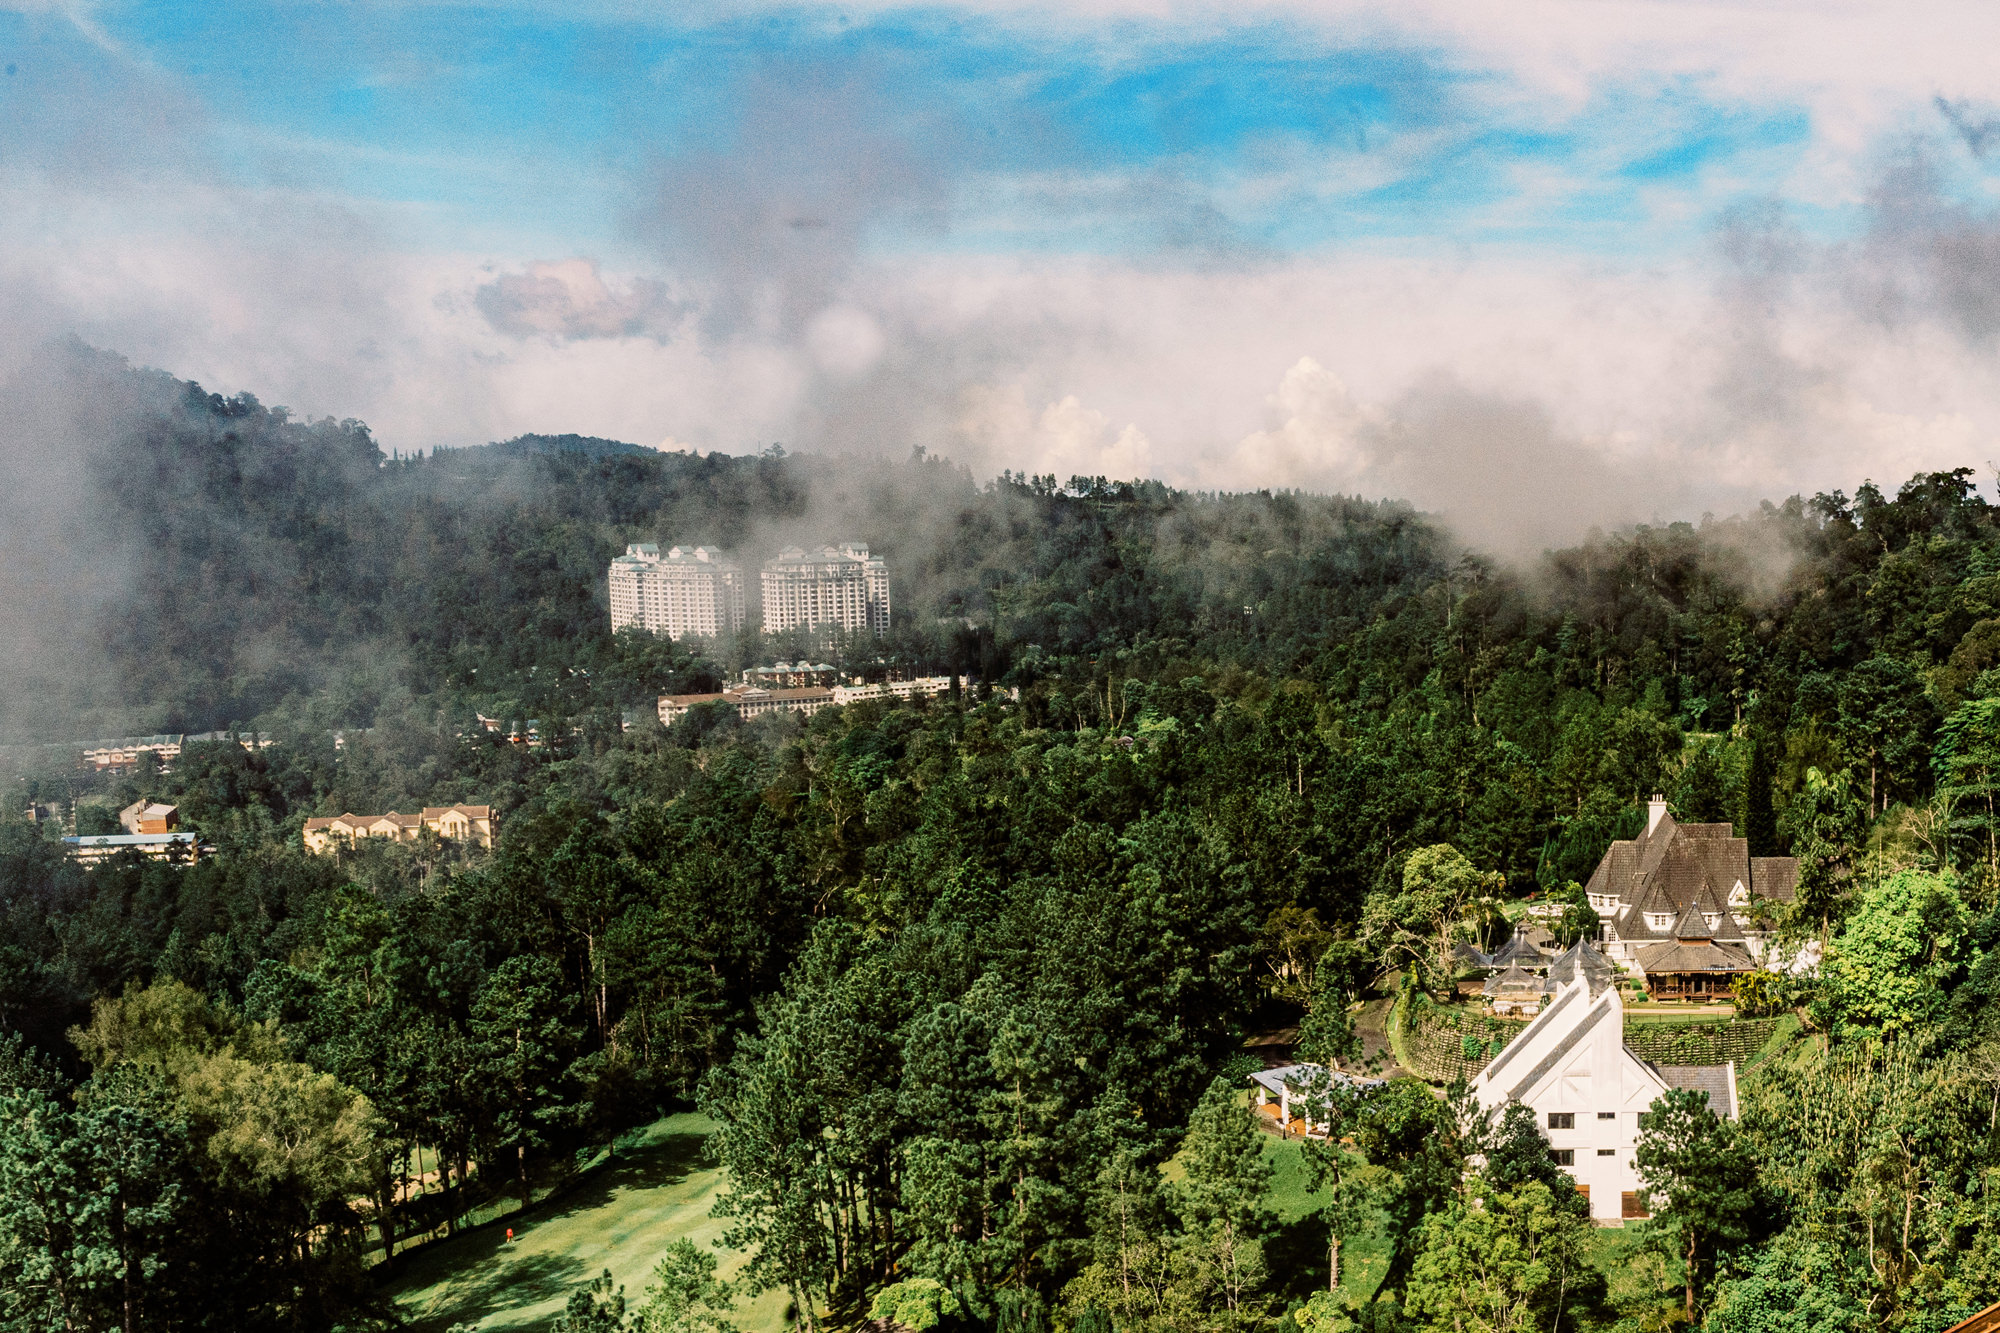 Puncak Dani, a beautiful estate on Genting Highlands, our wedding venue today